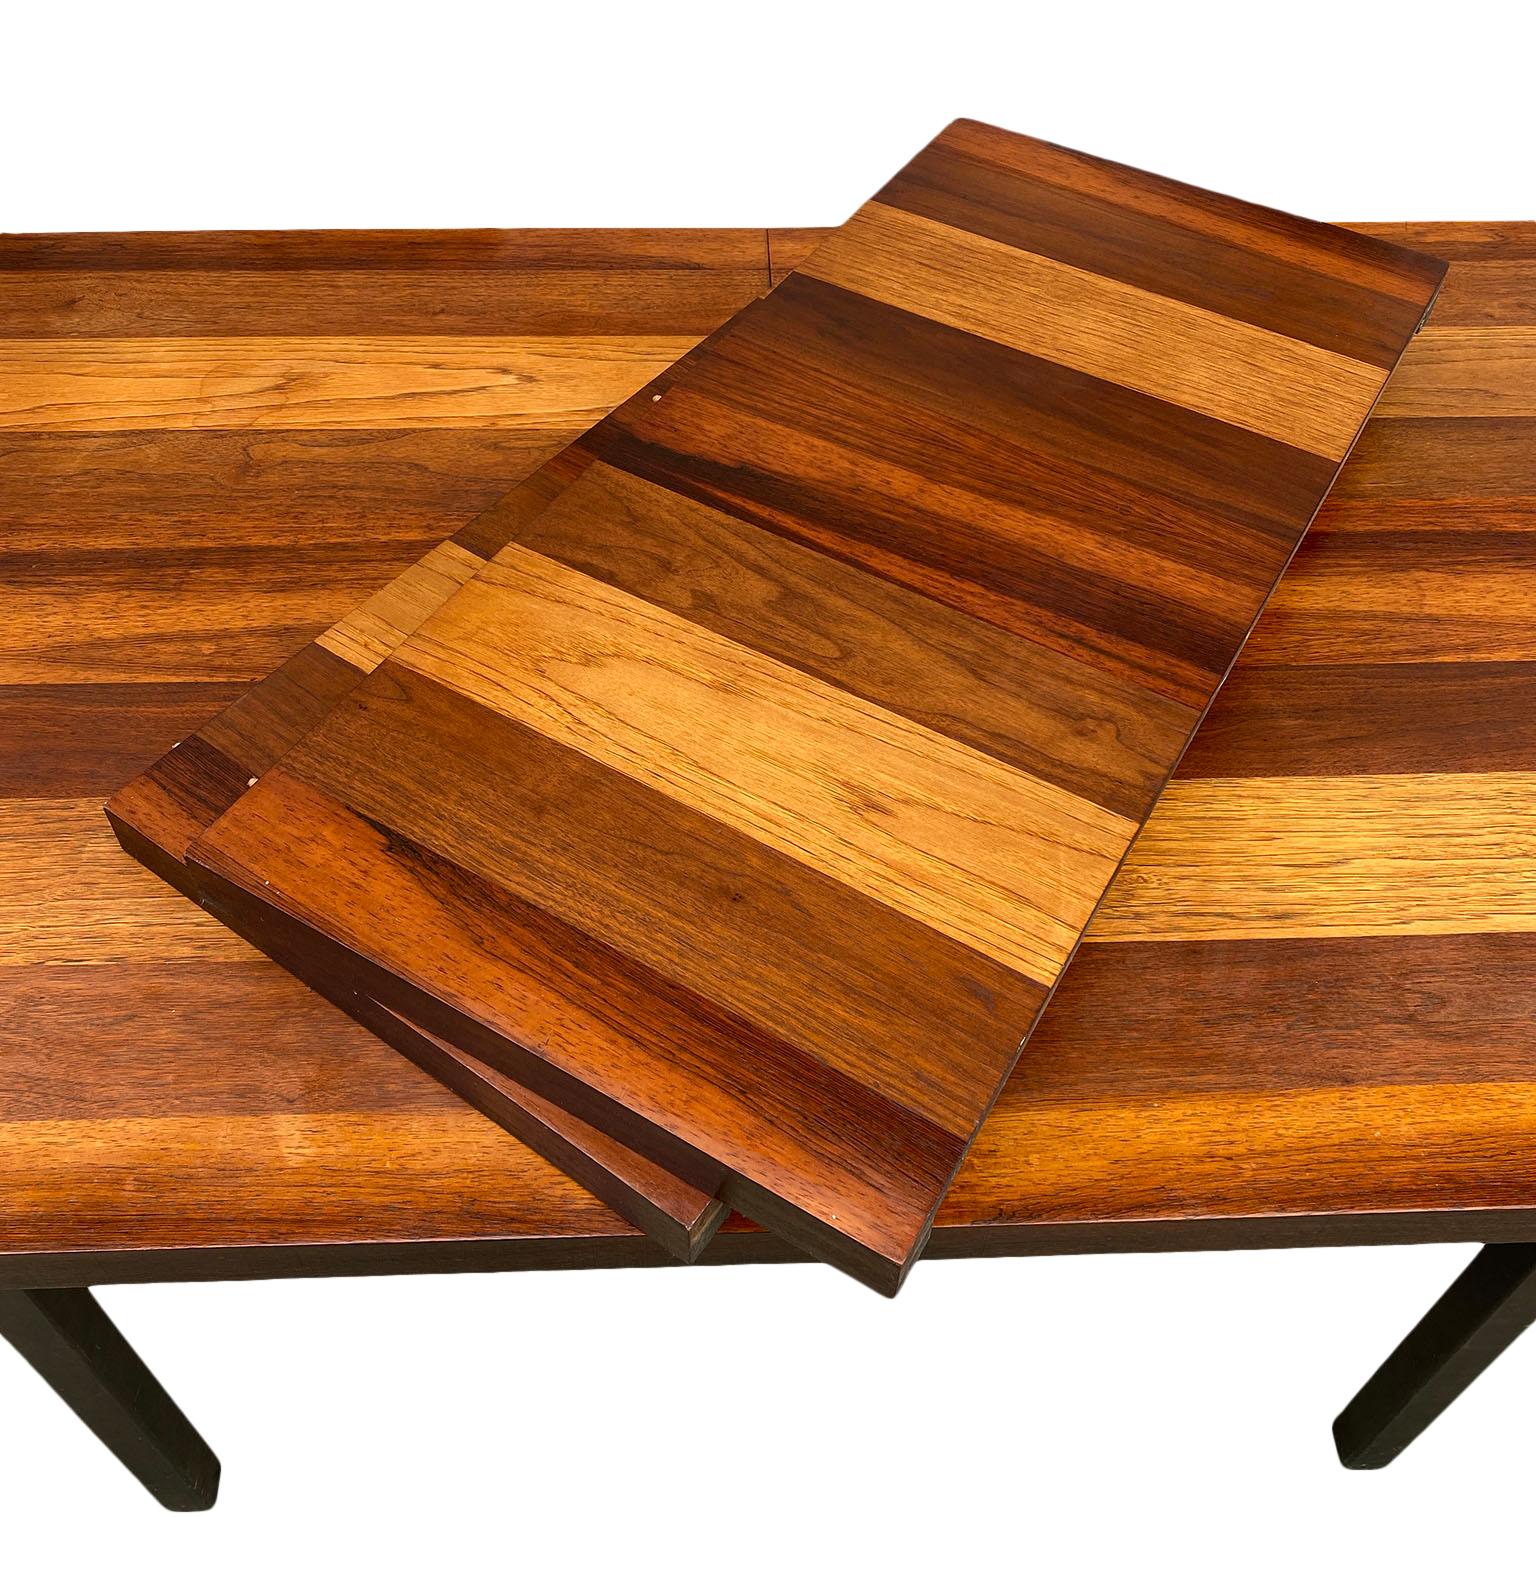 Mid-Century Modern American Danish style dining table by Milo Baughman. Beautiful tri-wood veneer table made in USA. Amazing teak, rosewood and walnut table. Made circa 1960 all black solid wood legs. Original finish in good vintage condition has 1